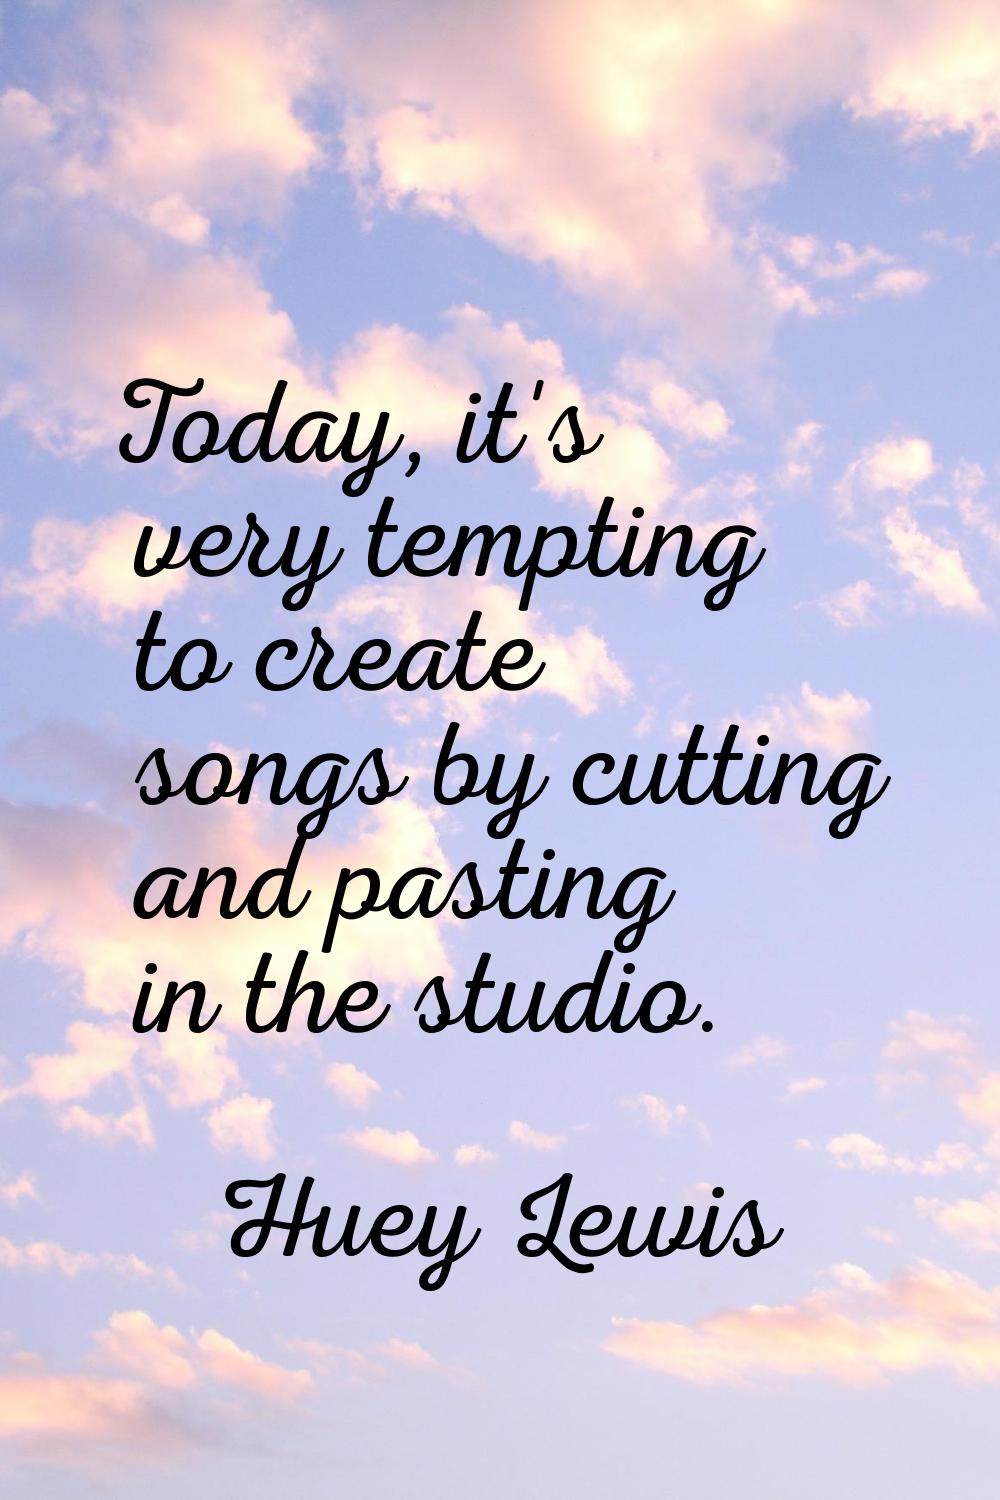 Today, it's very tempting to create songs by cutting and pasting in the studio.